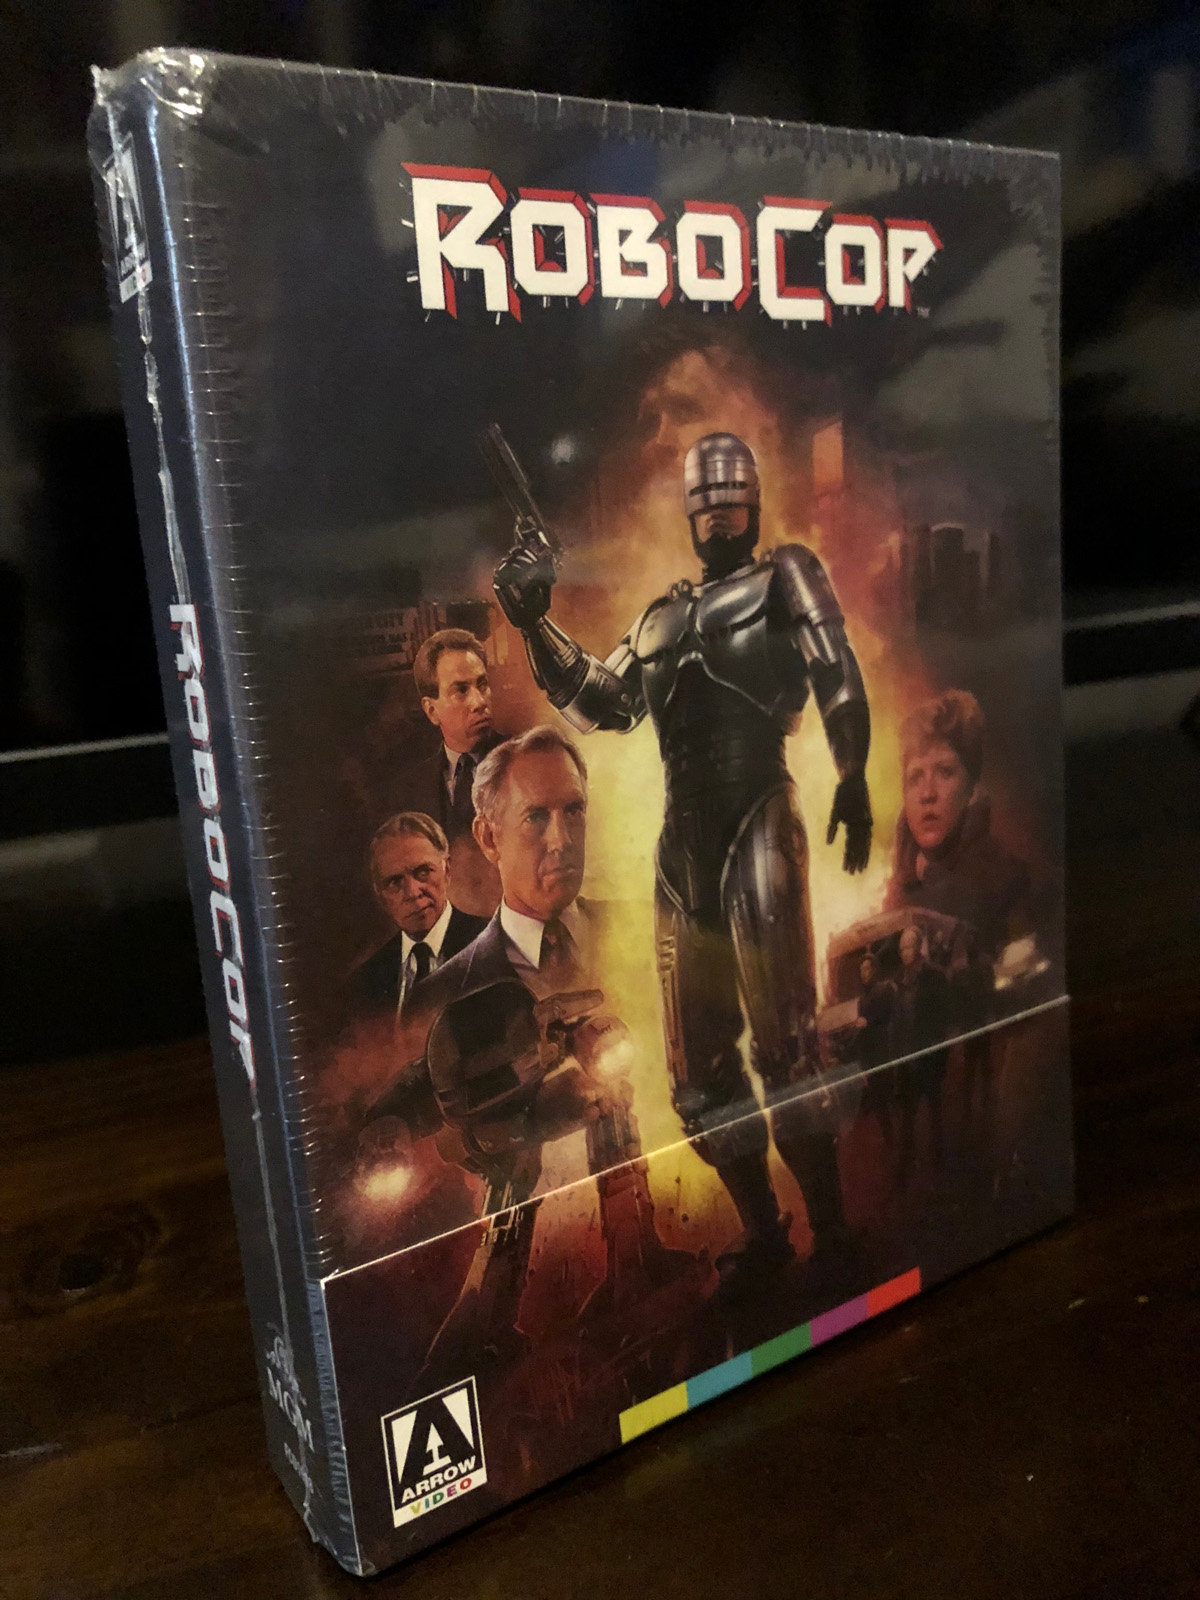 Robocop 2-Disc Limited Edition Collector's Set